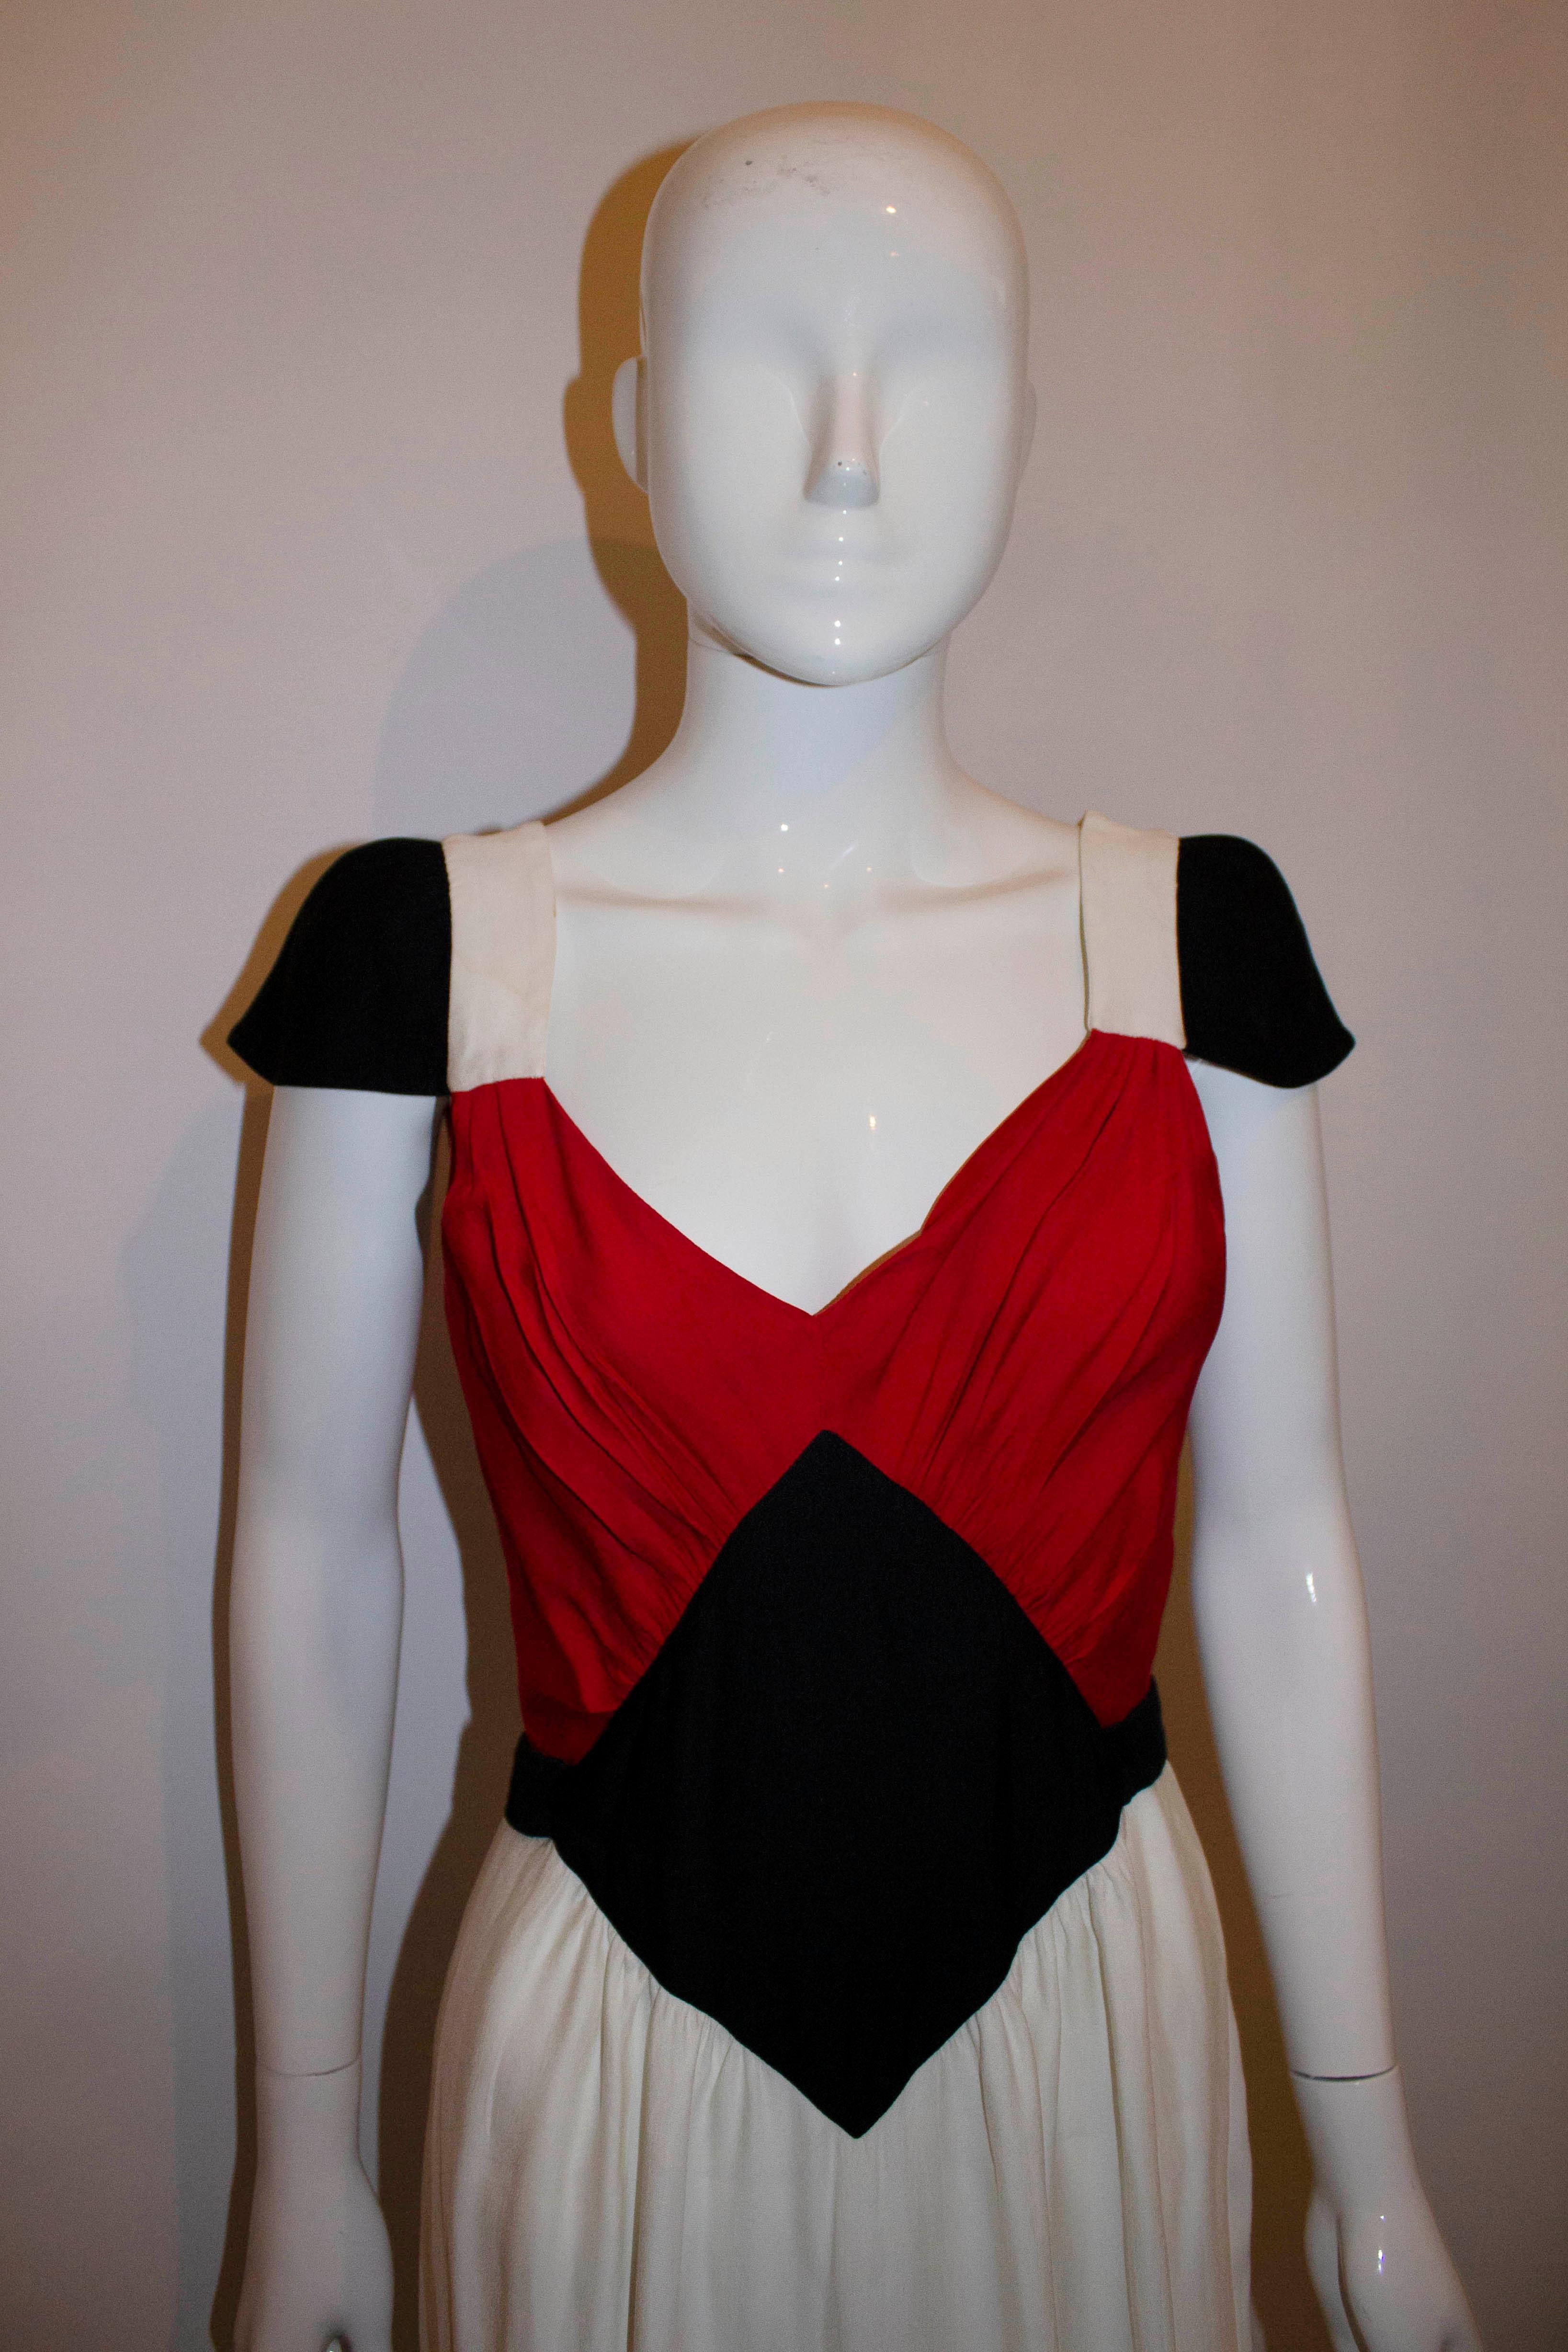 A fun dress by Jean Paul Gaultier , Femme line. The dress has cap sleeves, a central back zip opening, and v neckline. Made in Italy, Size Eu italian 42/UK10. Measurements Bust 37/8'', length 43''